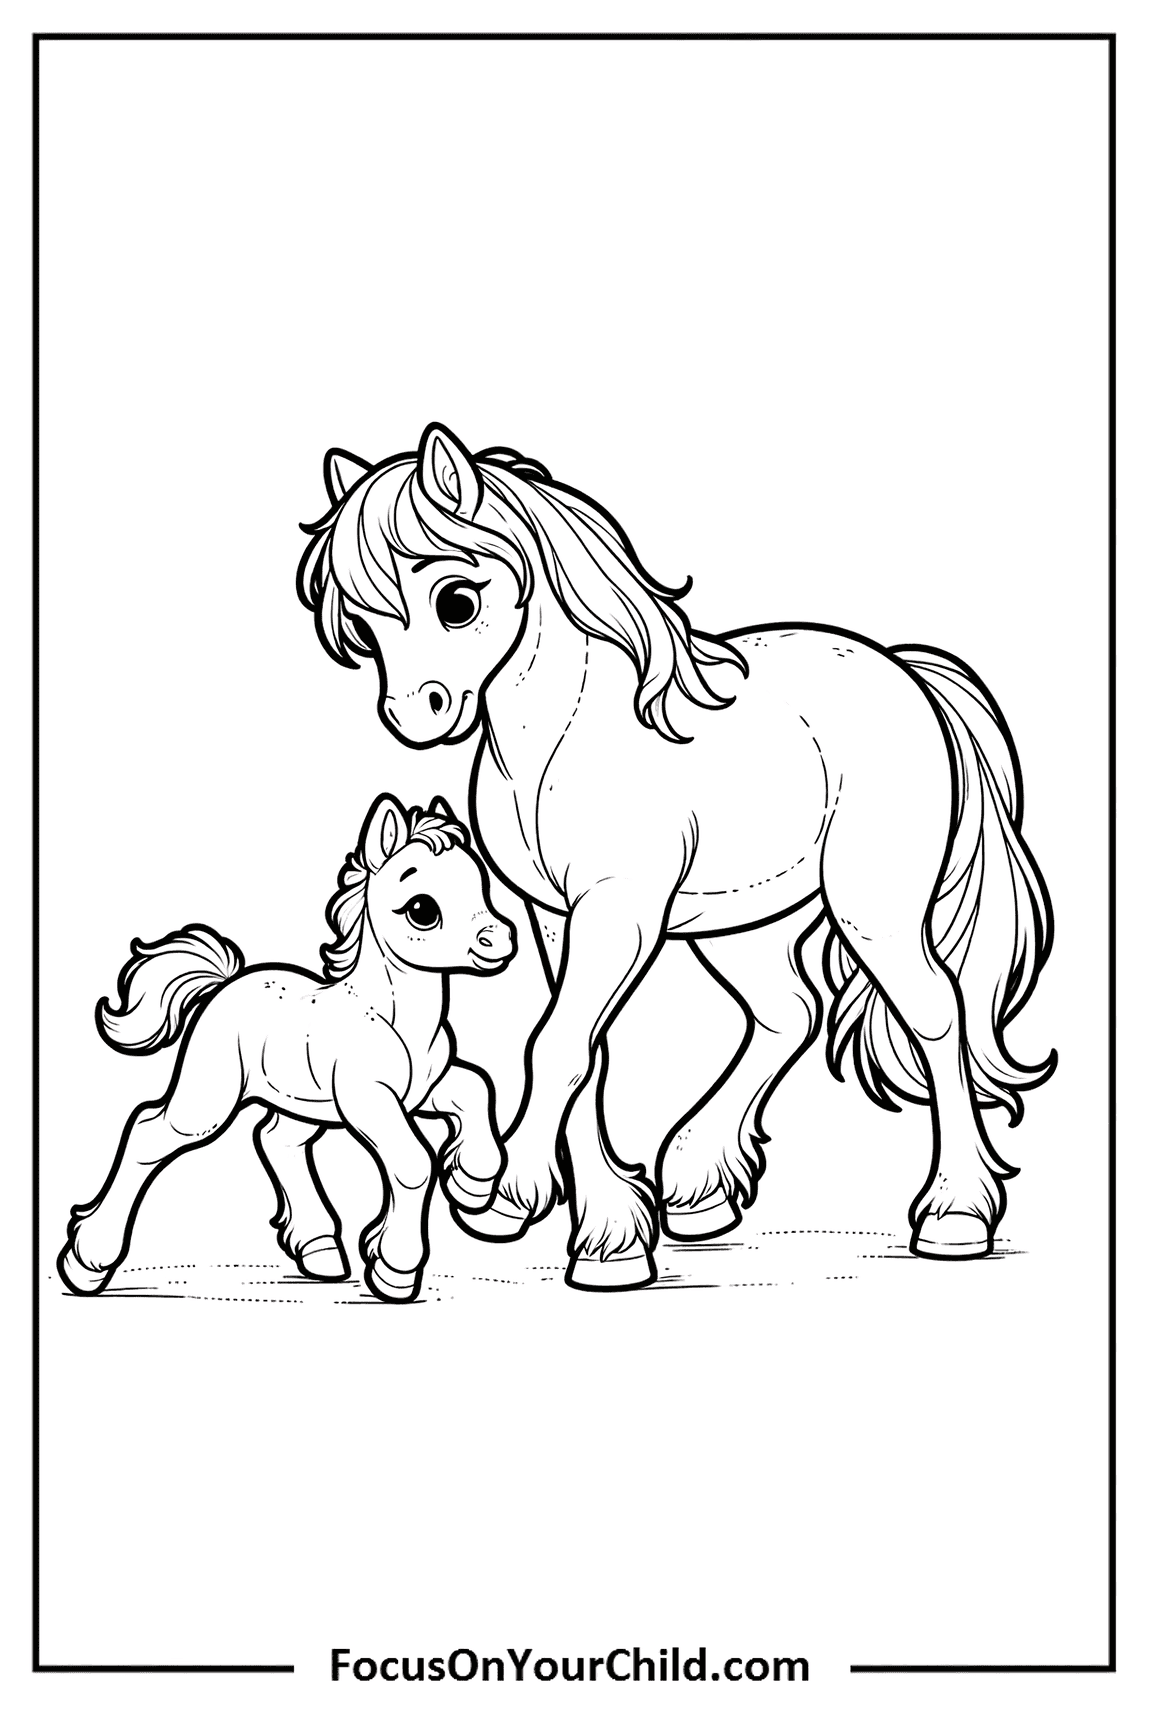 Gentle mare and foal illustration for childrens coloring book.